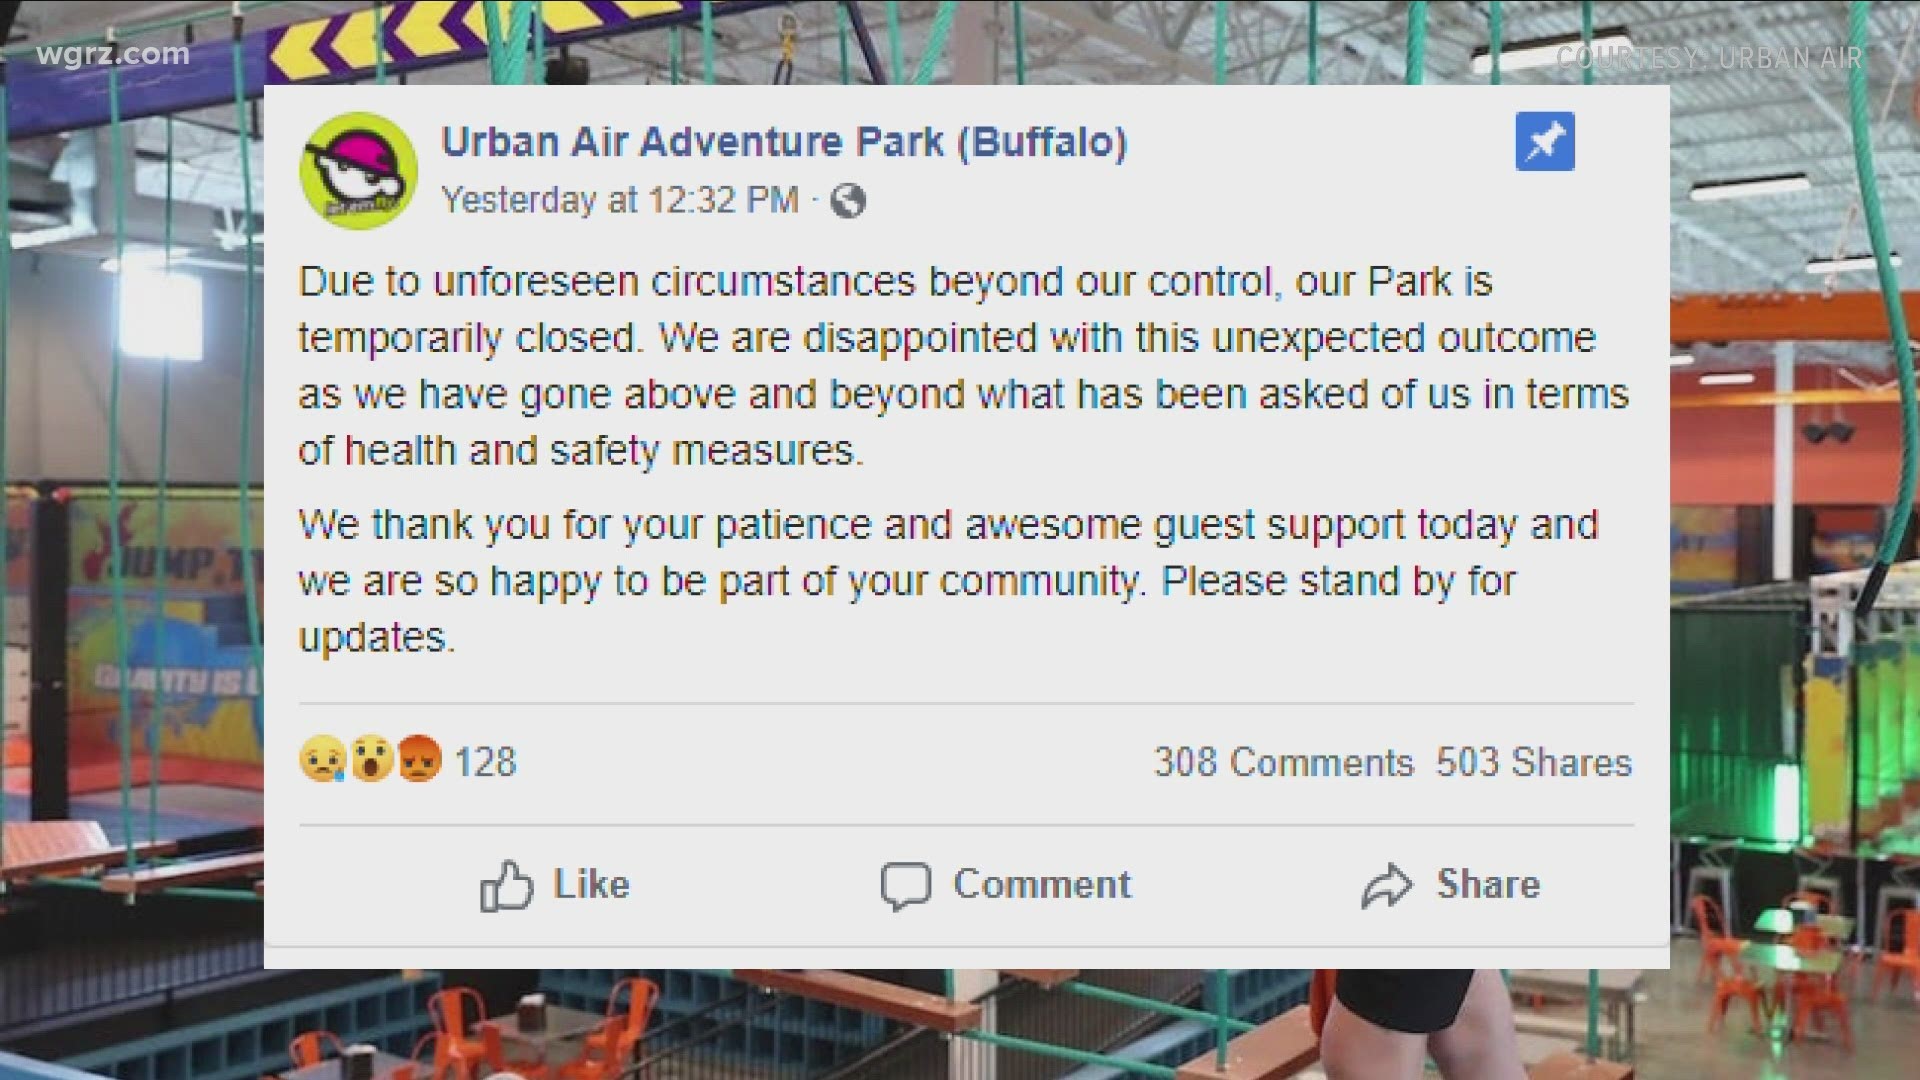 The Erie County Department of Health says the Urban Air Adventure Park may be allowed to re-open after its safety plan has been reviewed and approved by the ECDOH.